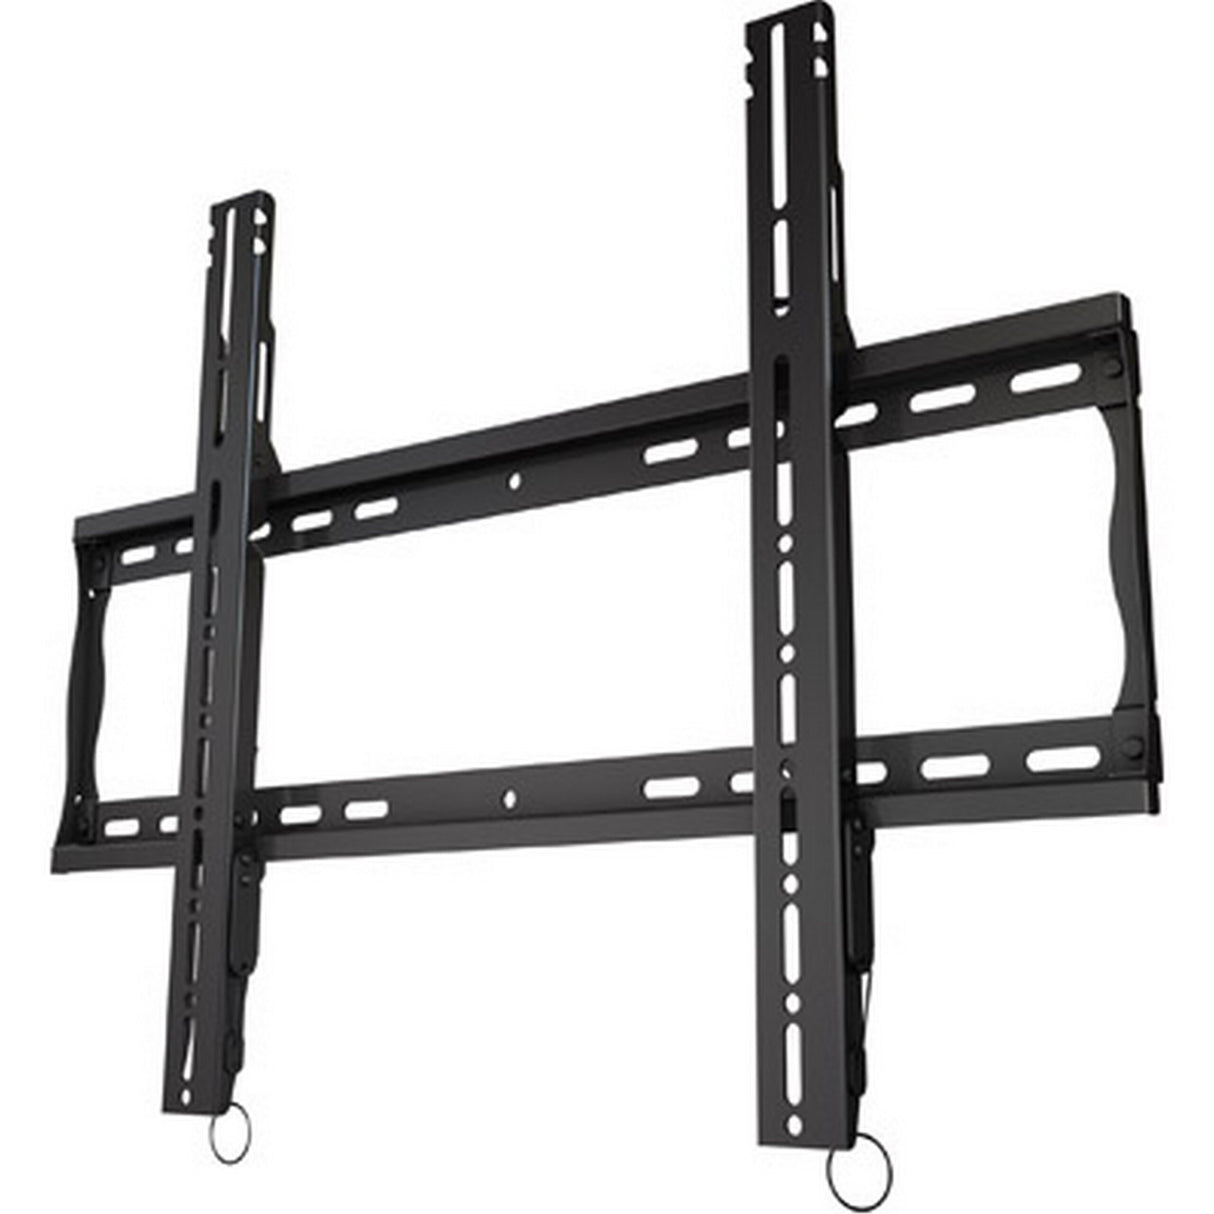 Mustang Professional MPF-L65UA Flat Universal Wall Mount for 32-75 Inch LCD, LED and Plasma TVs